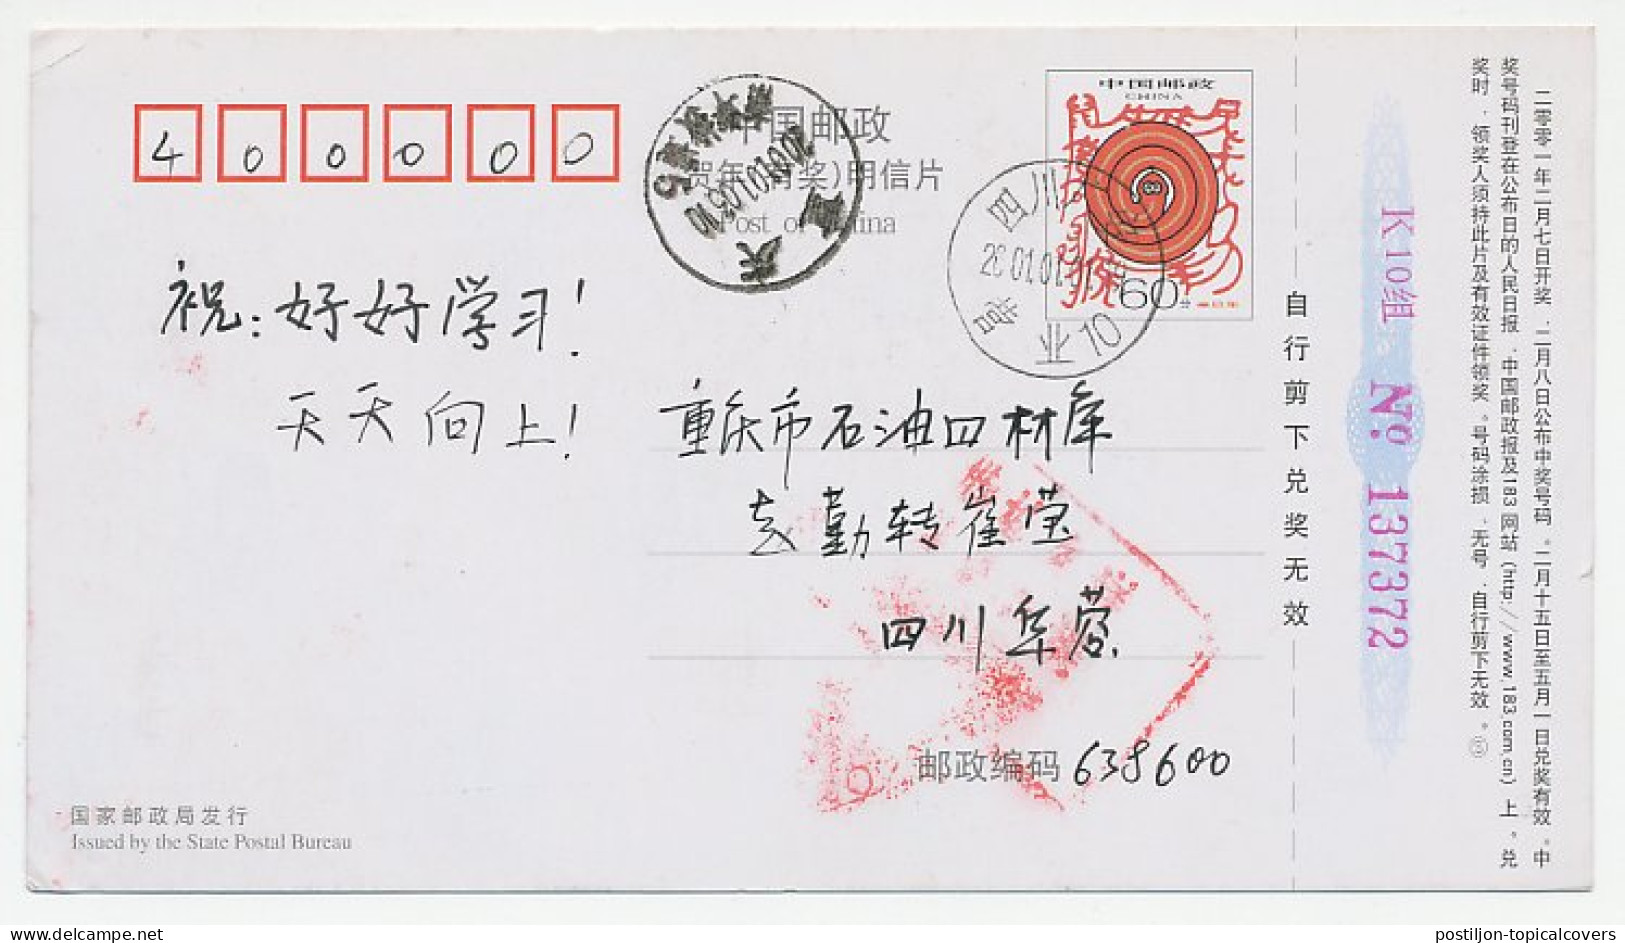 Postal Stationery China 2001 Map - Earth - China Mobile - Géographie